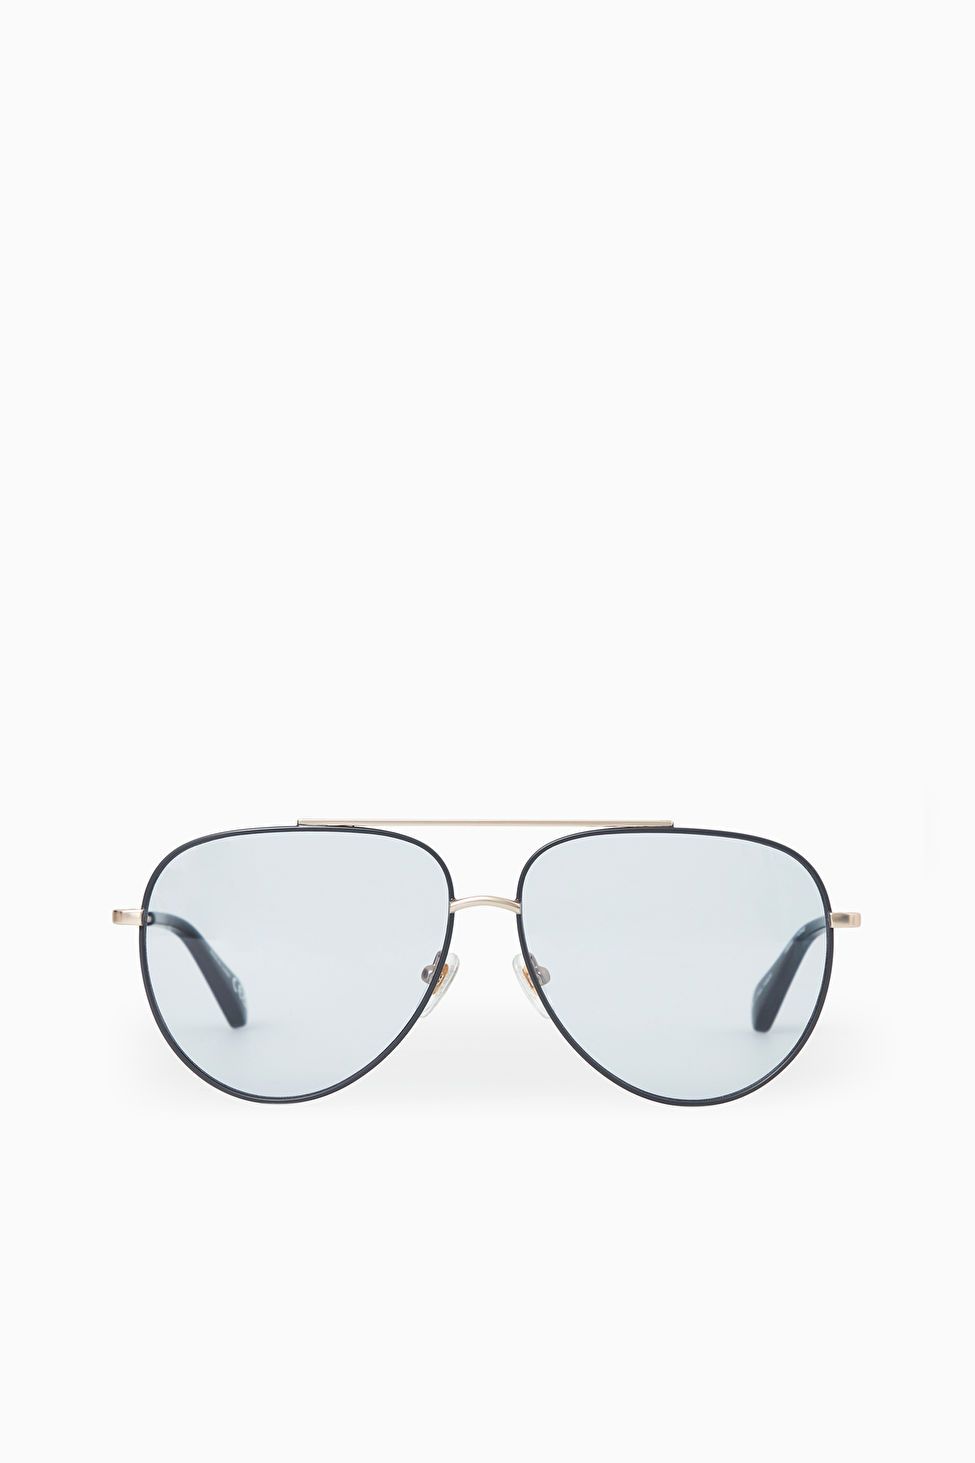 THE AVIATOR METAL SUNGLASSES - GOLD / BLUE - Accessories - COS | COS (US)